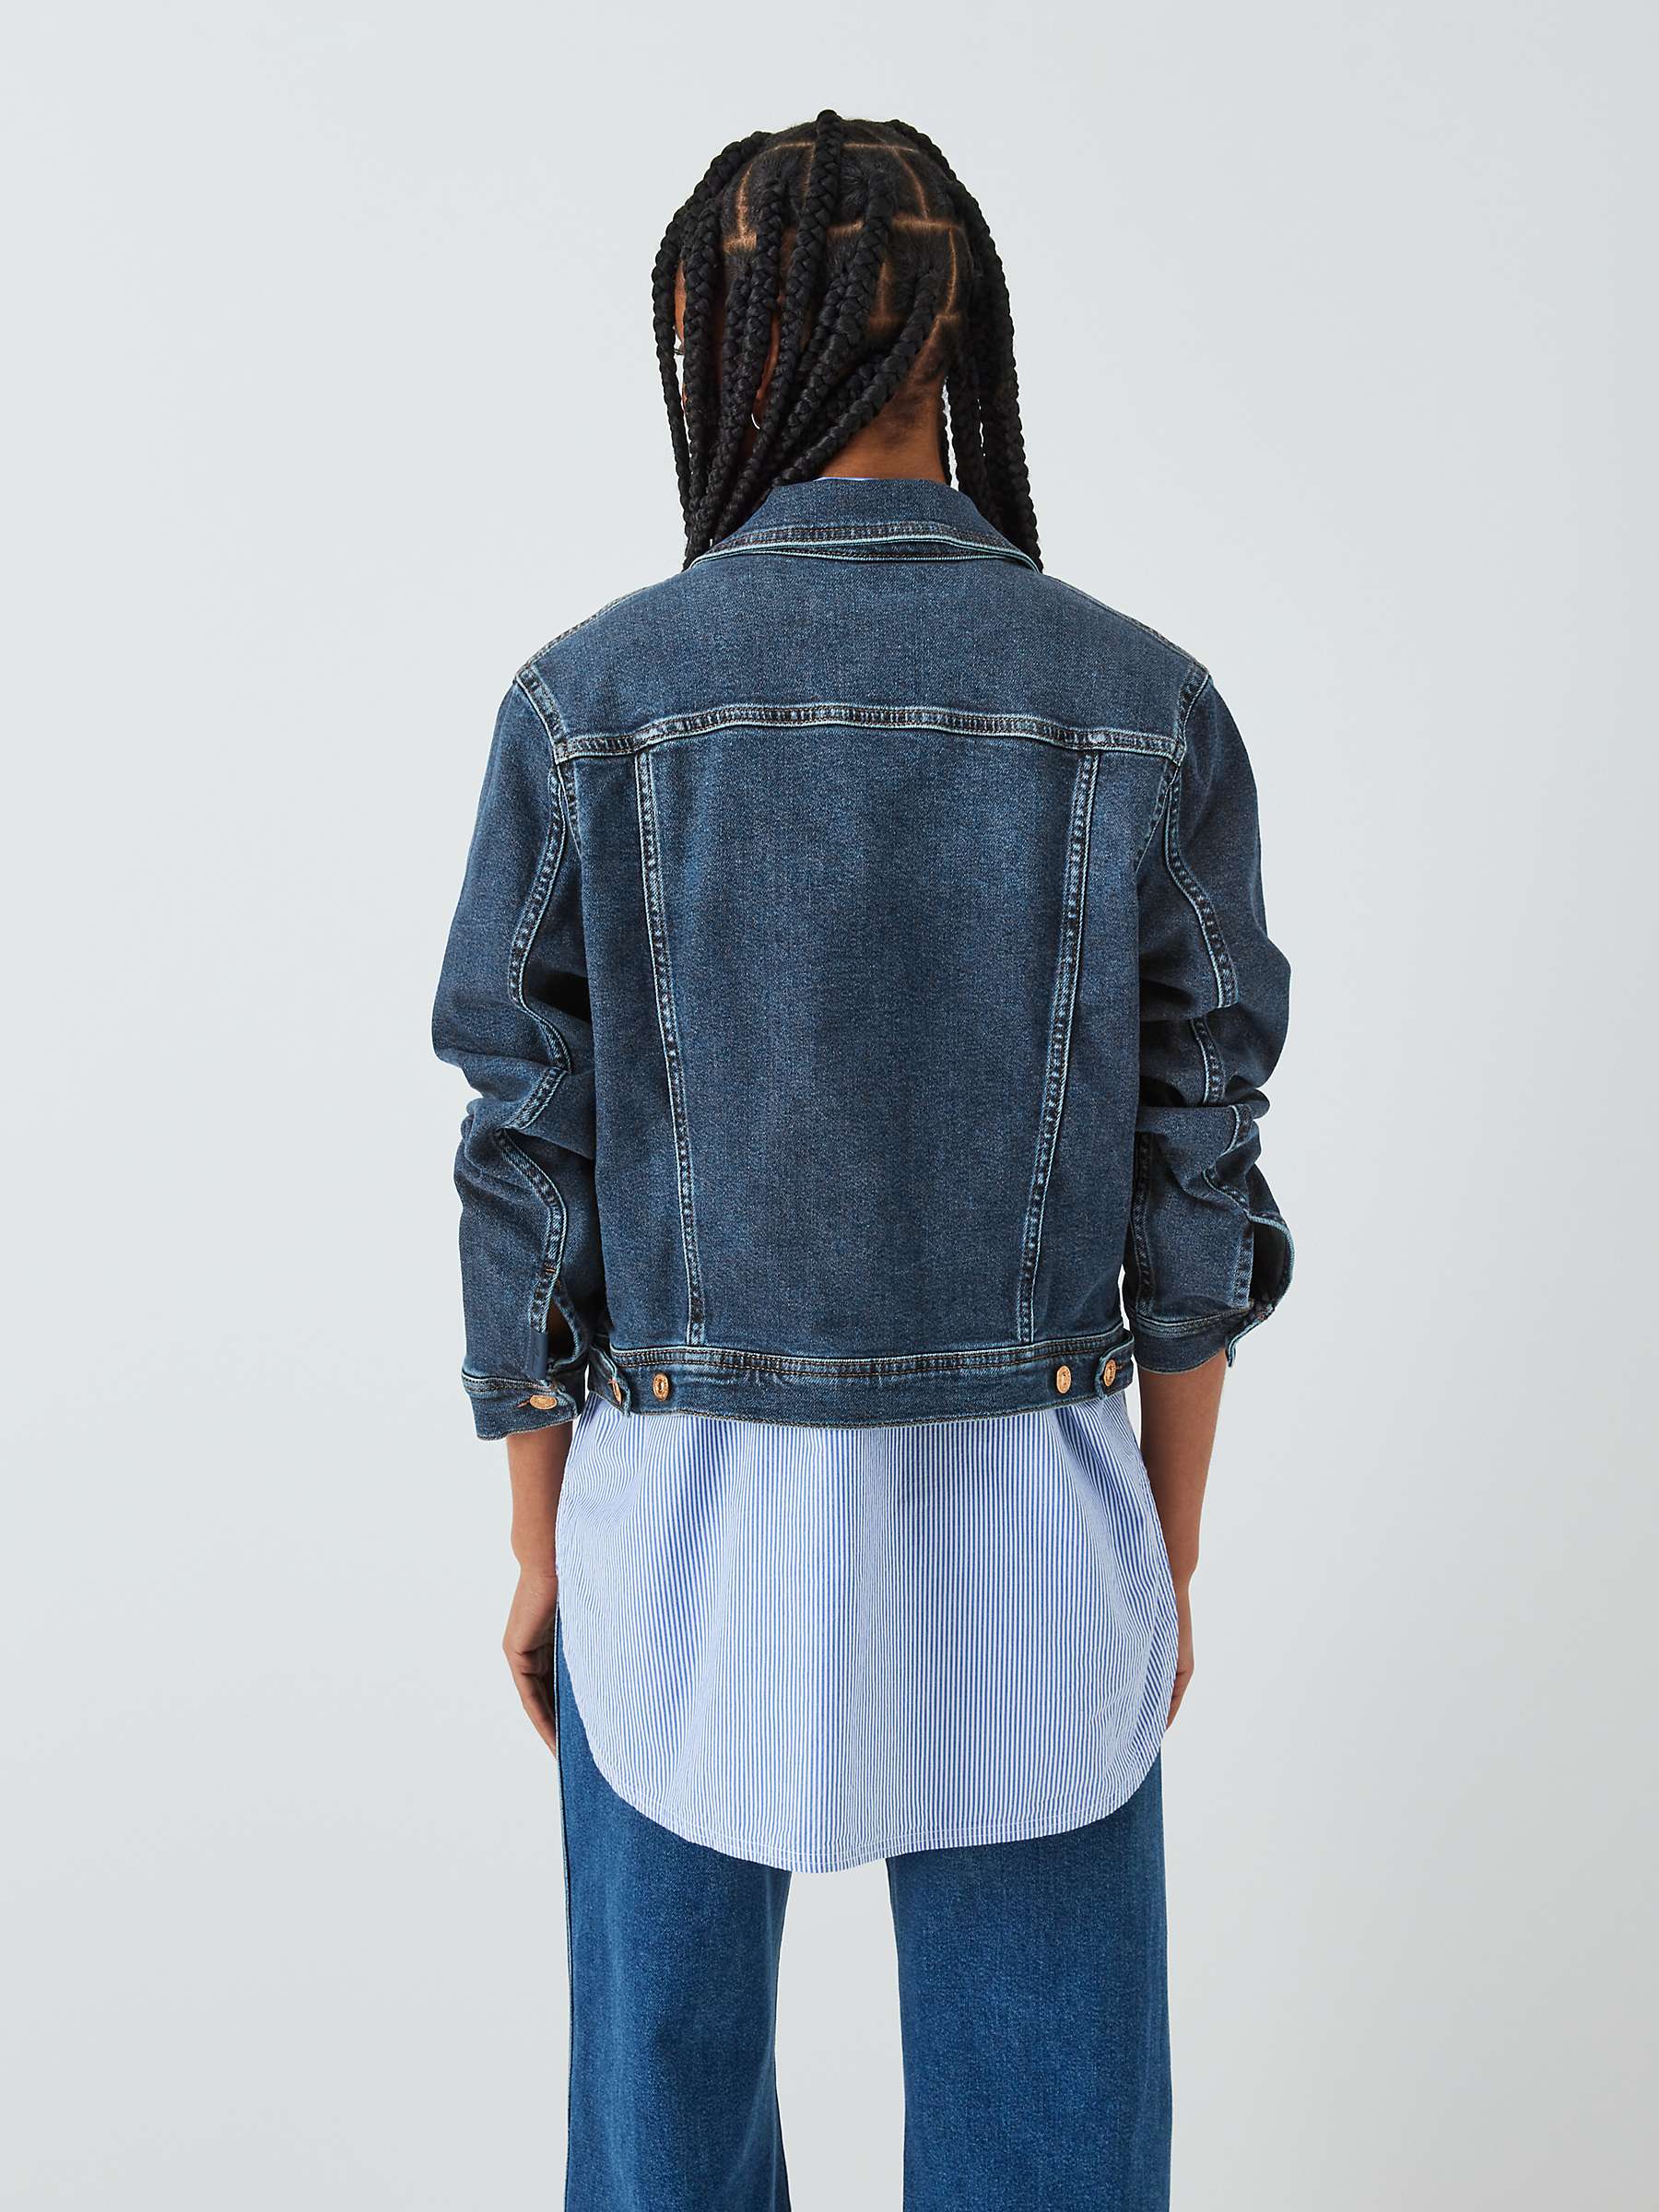 Buy 7 For All Mankind Classic Trucker Jacket, Luxe Vintage Sea Level Online at johnlewis.com